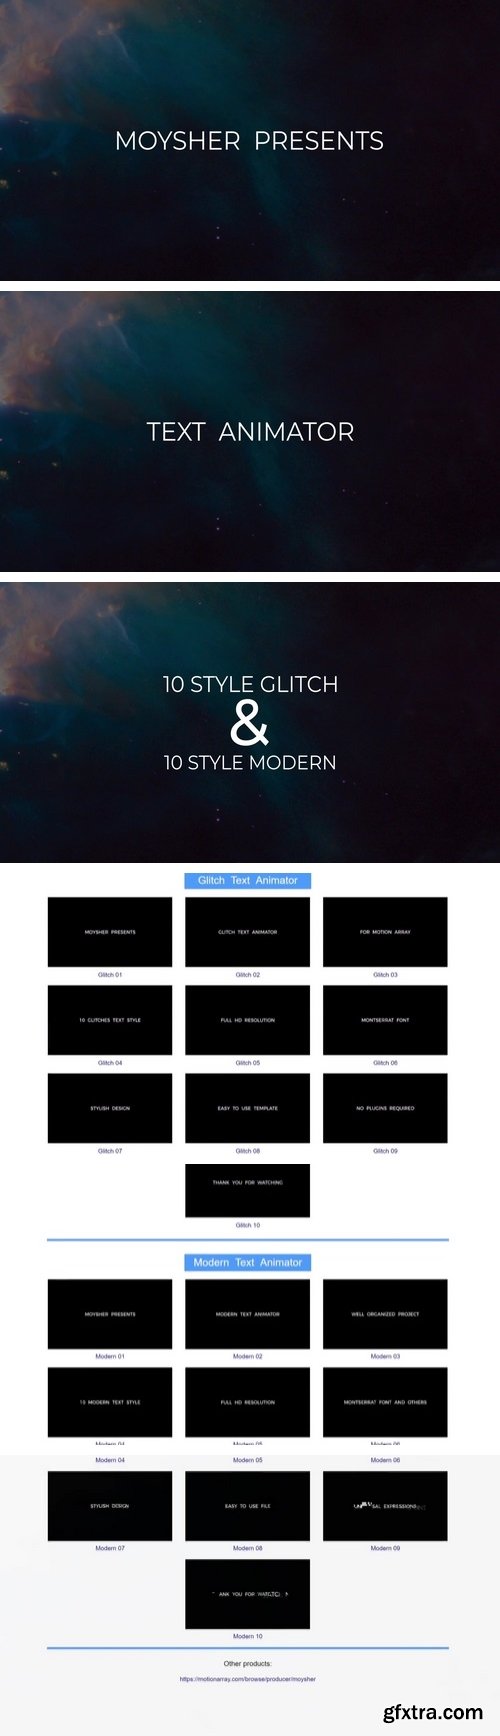 MotionArray - Text Animator After Effects Templates 58400